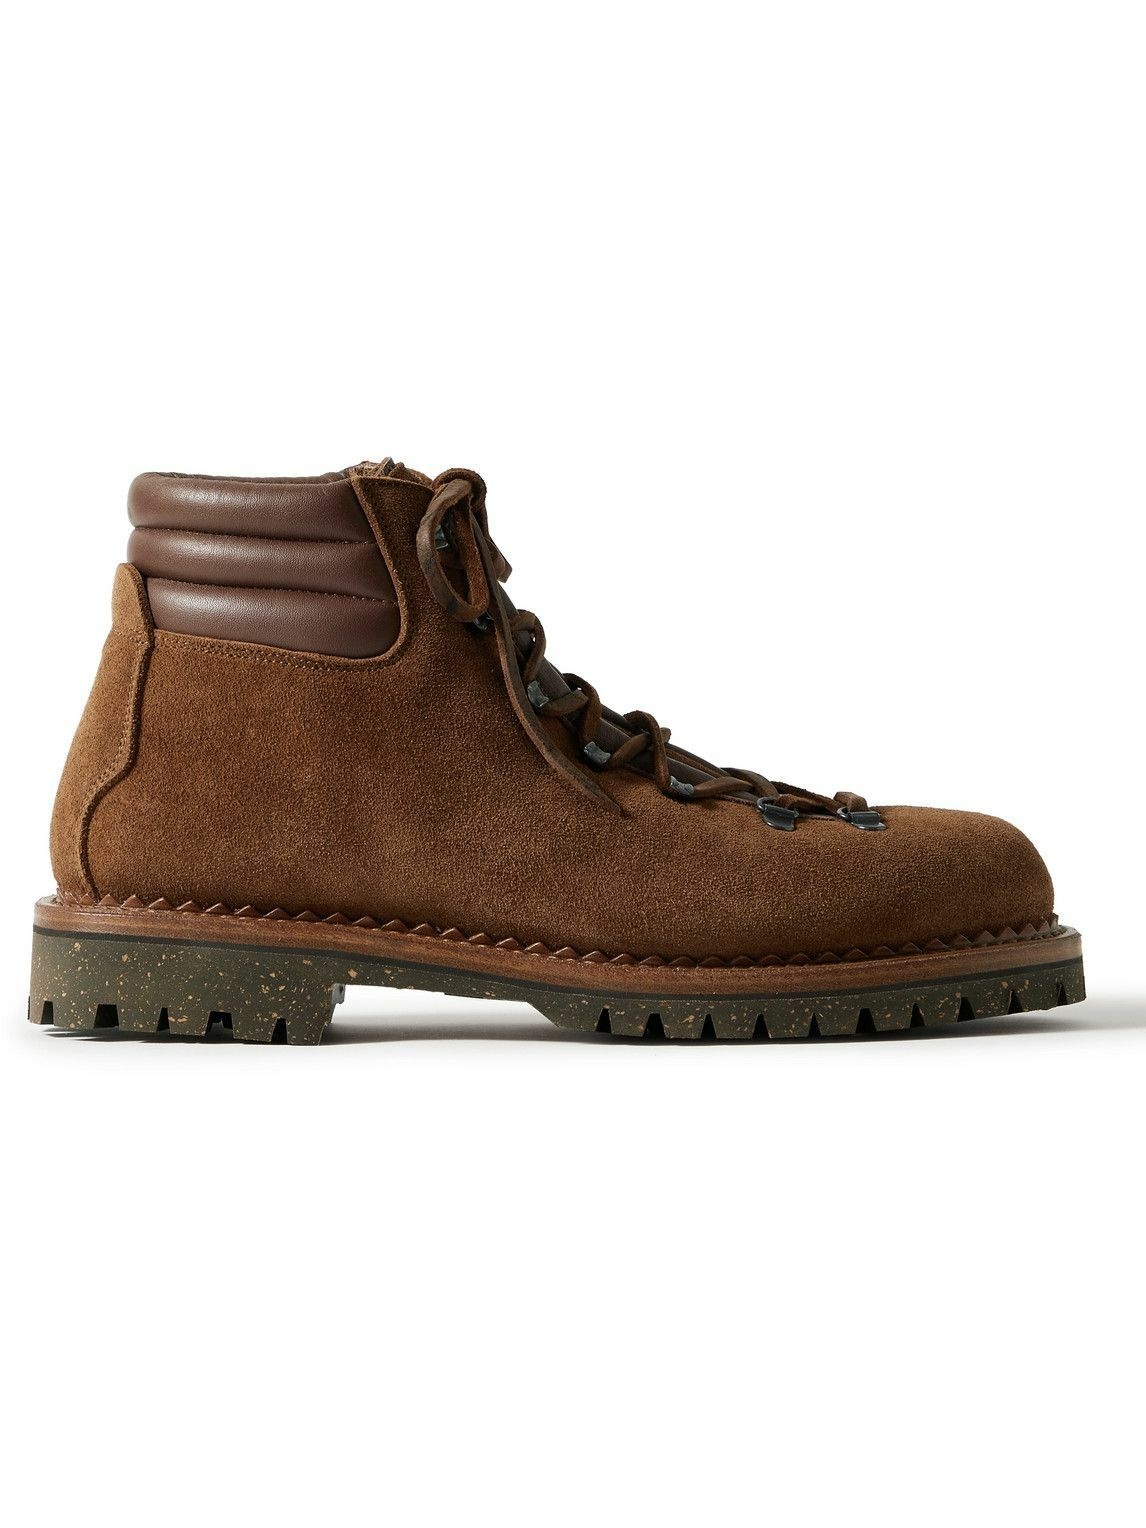 Yuketen - Vittore Shearling-Lined Leather-Trimmed Suede Boots - Brown ...